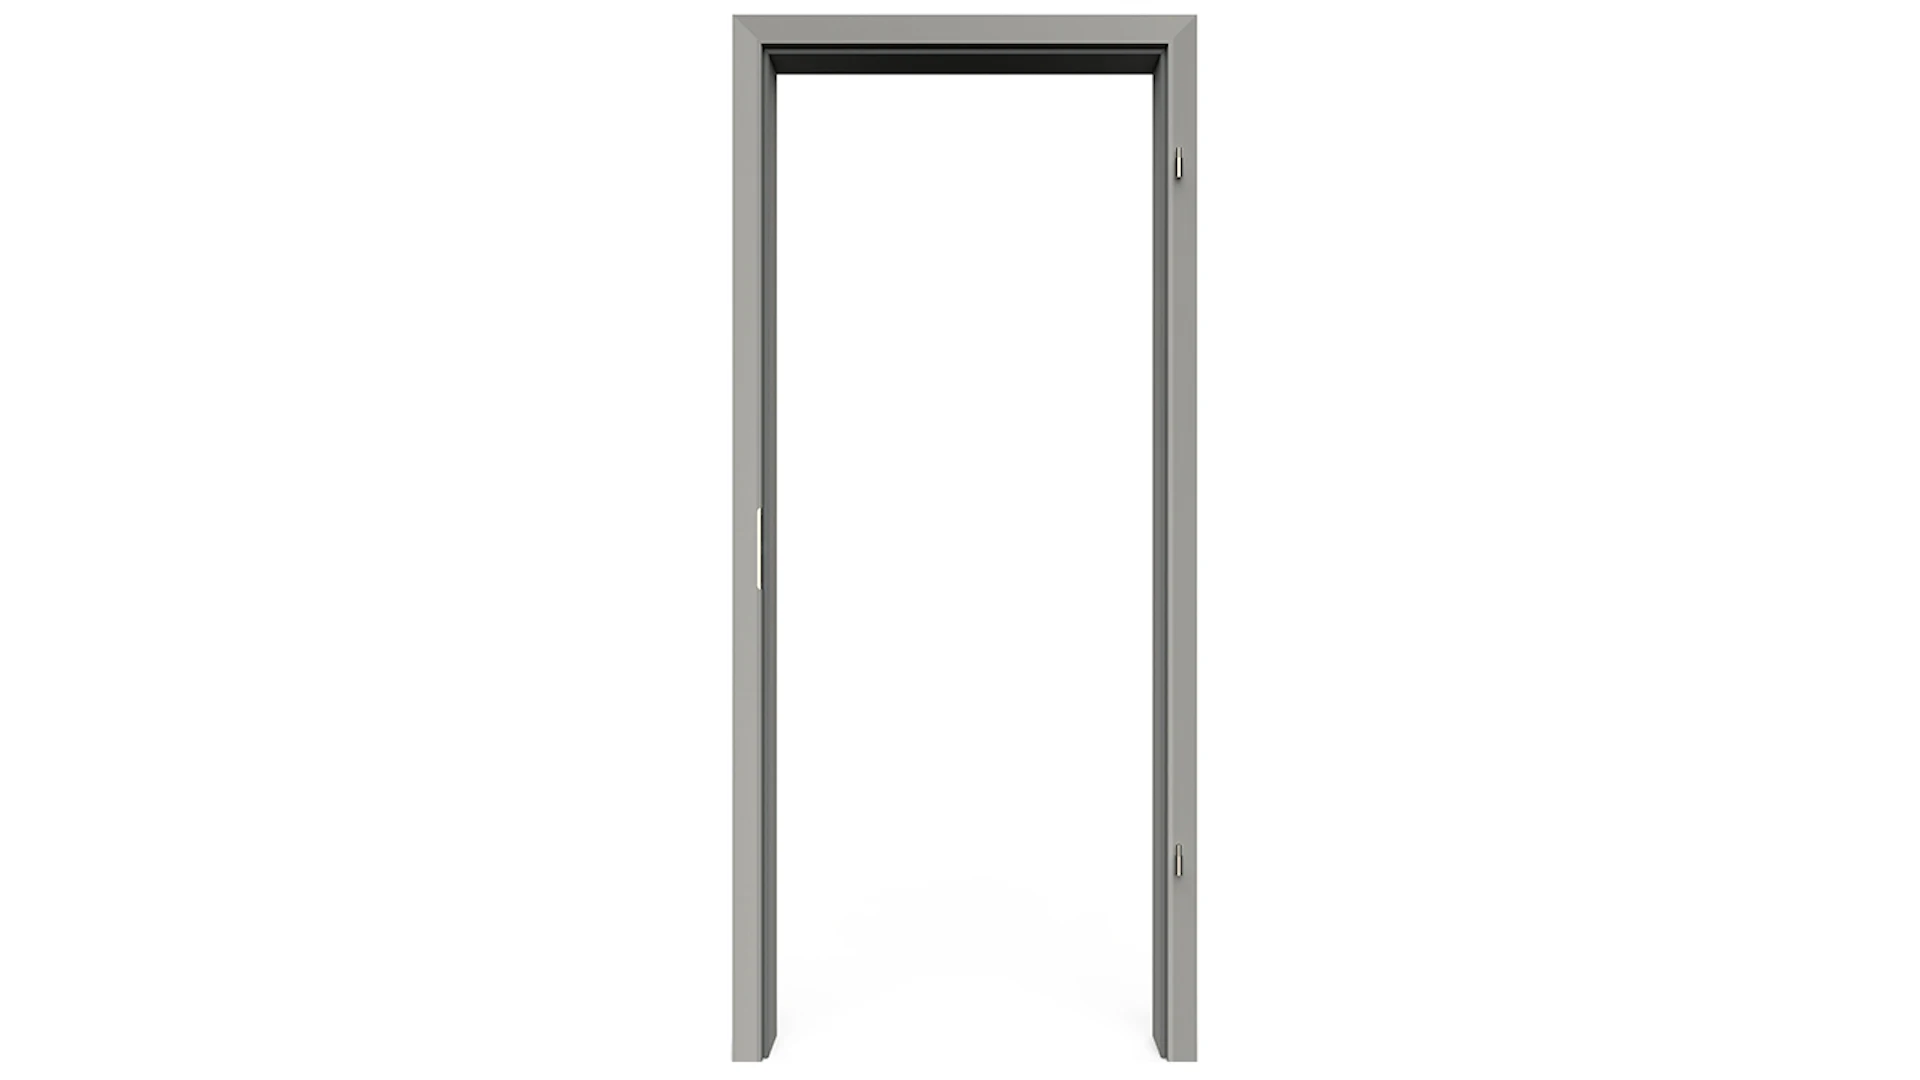 planeo Standard Doorframe Rounded edge - CPL Silver grey - 2110 x 610 x 80 mm DIN Left